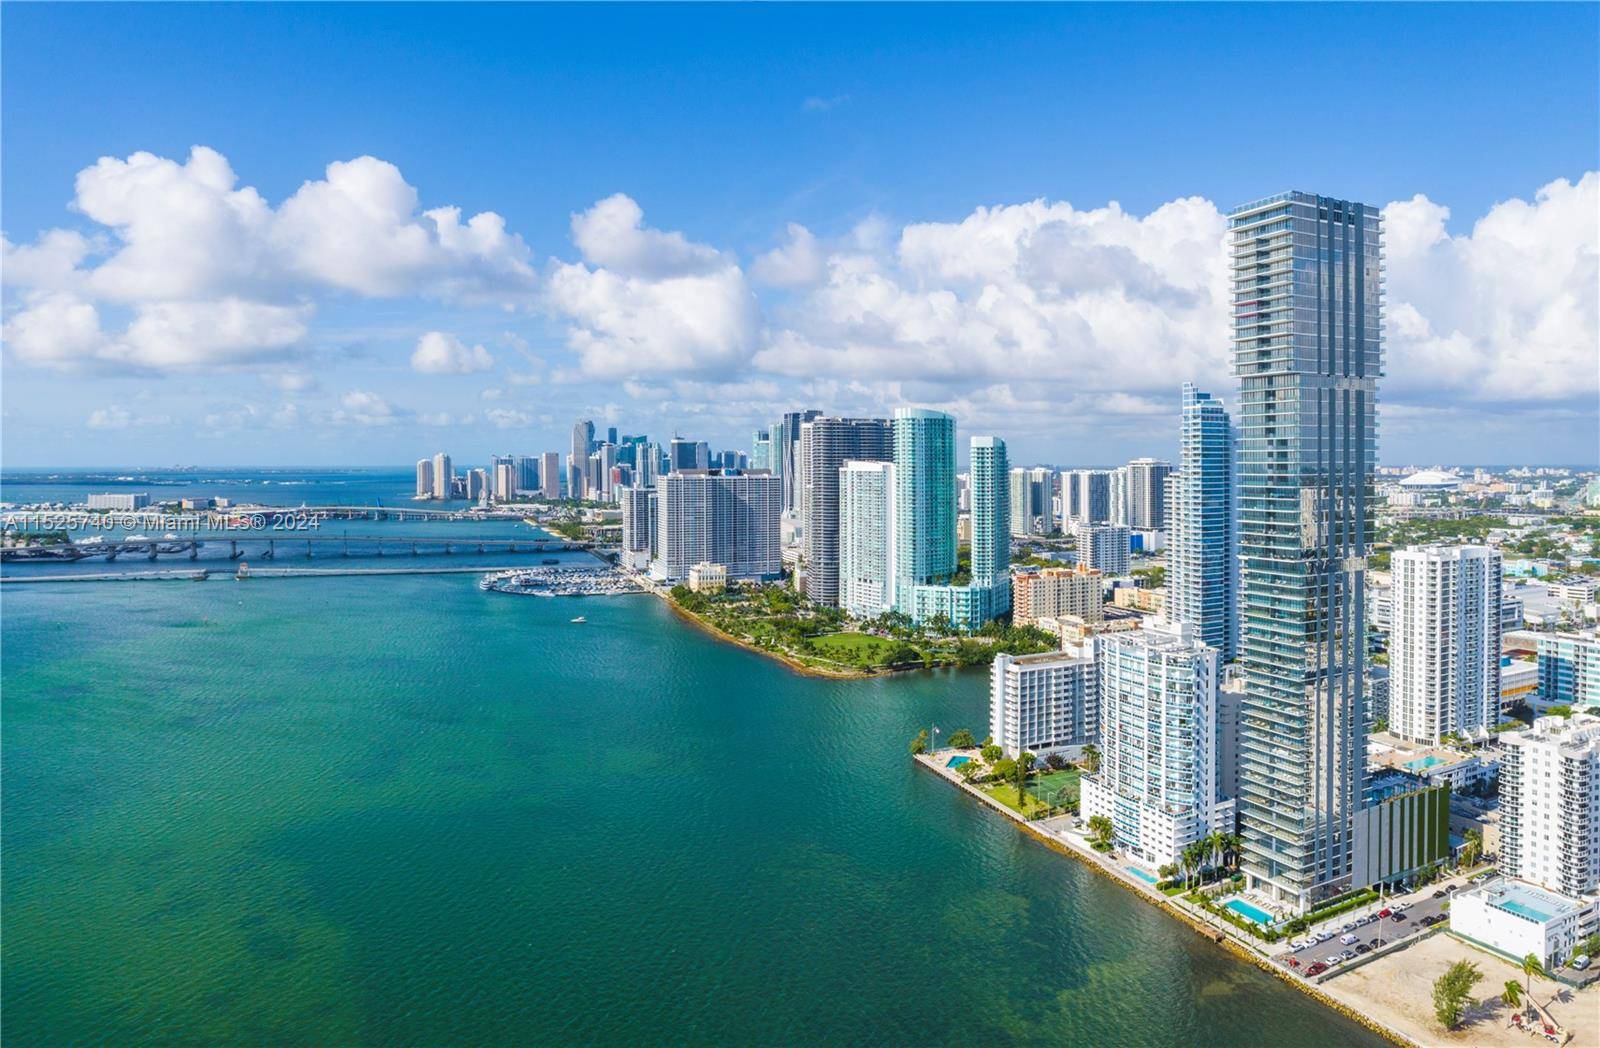 Rising alongside Biscayne Bay, Elysee is at the center of all that's new and exciting in Miami.